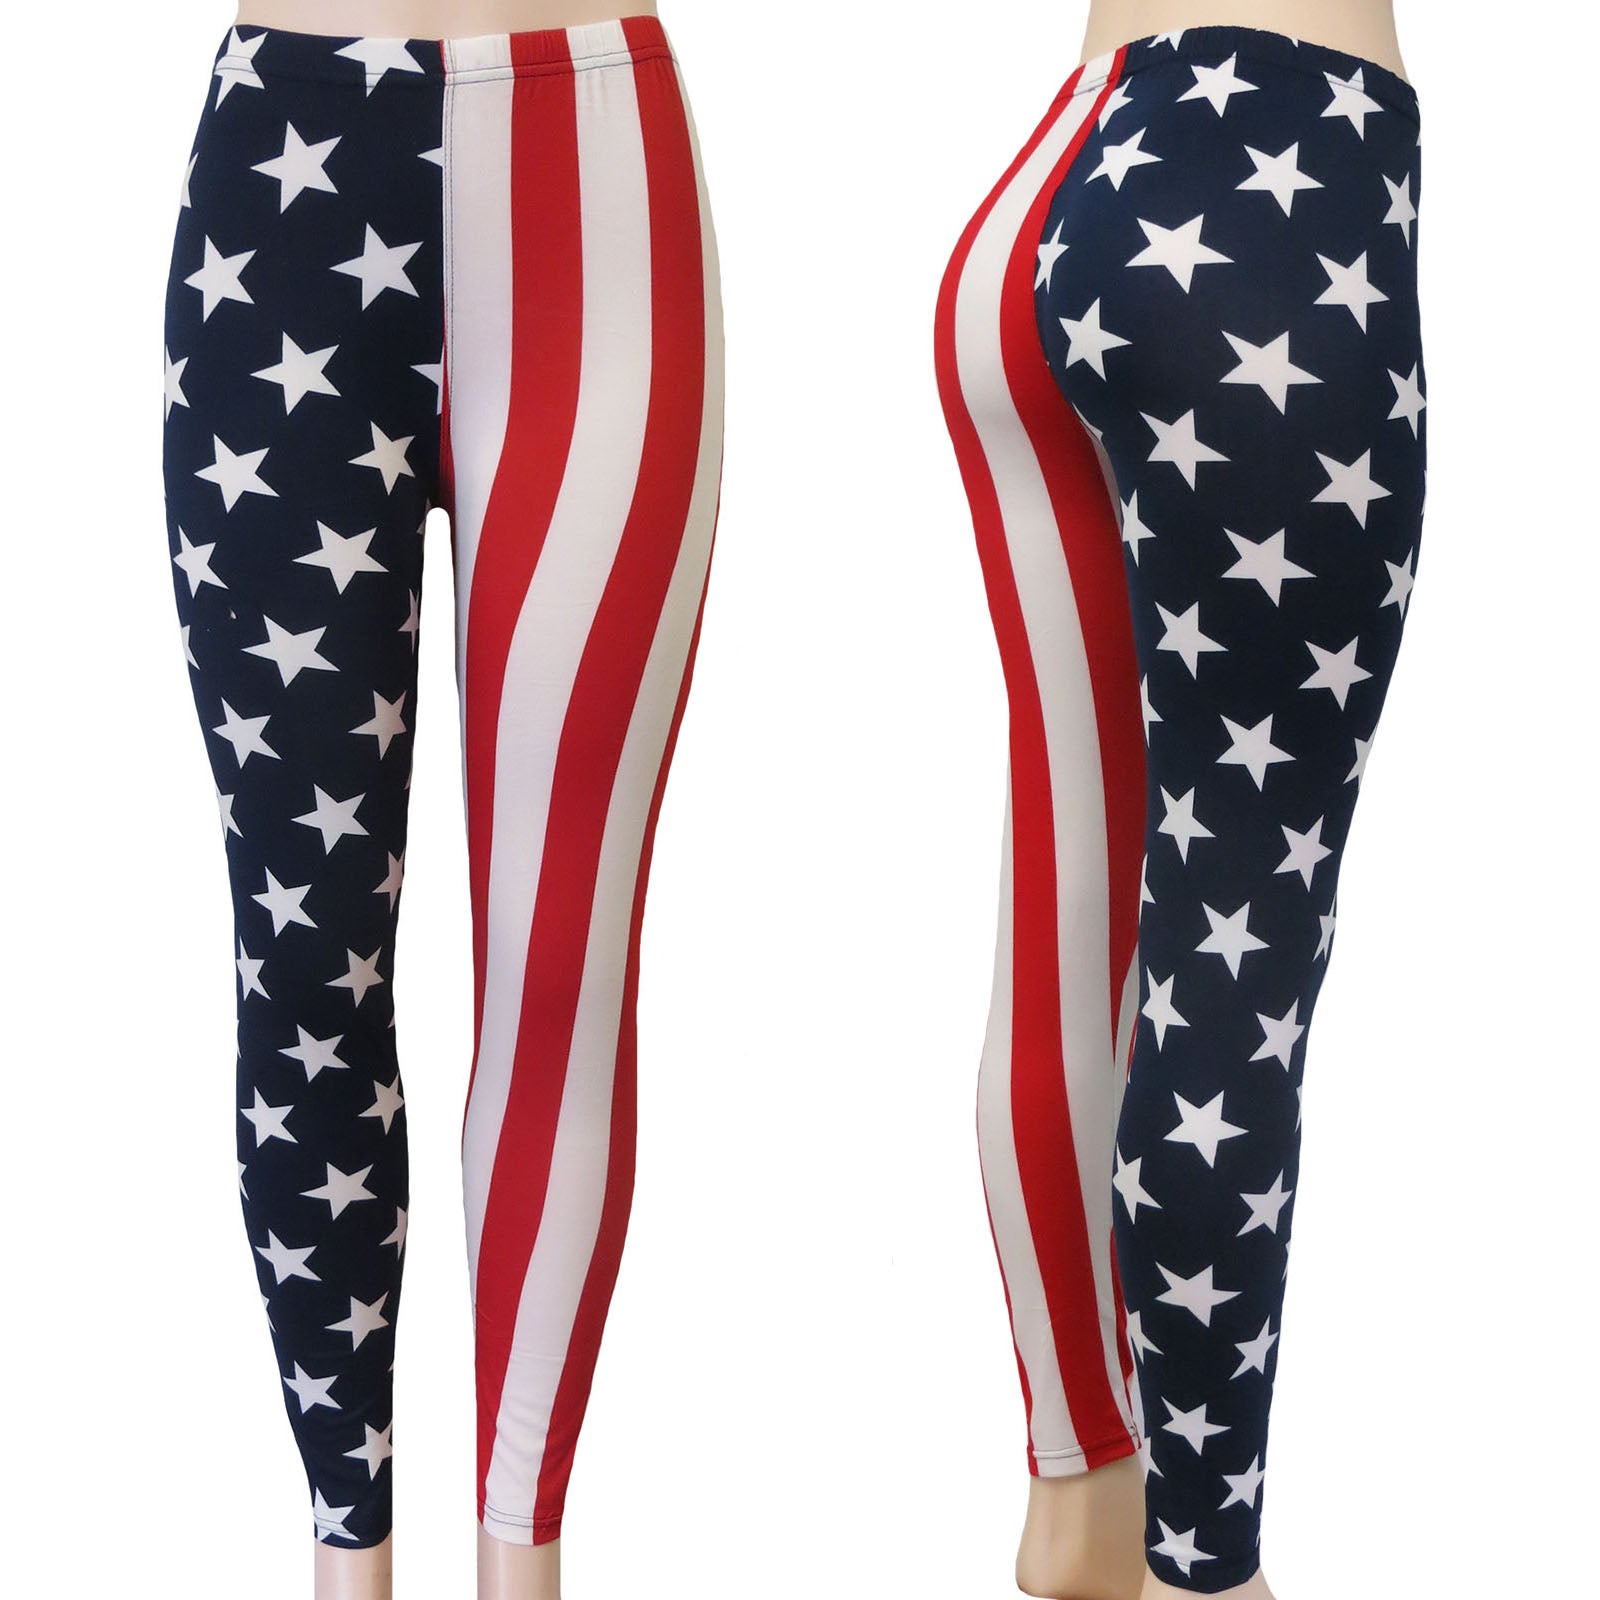 Wholesale American Flag Leggings in Red White and Blue Stars and Stripes